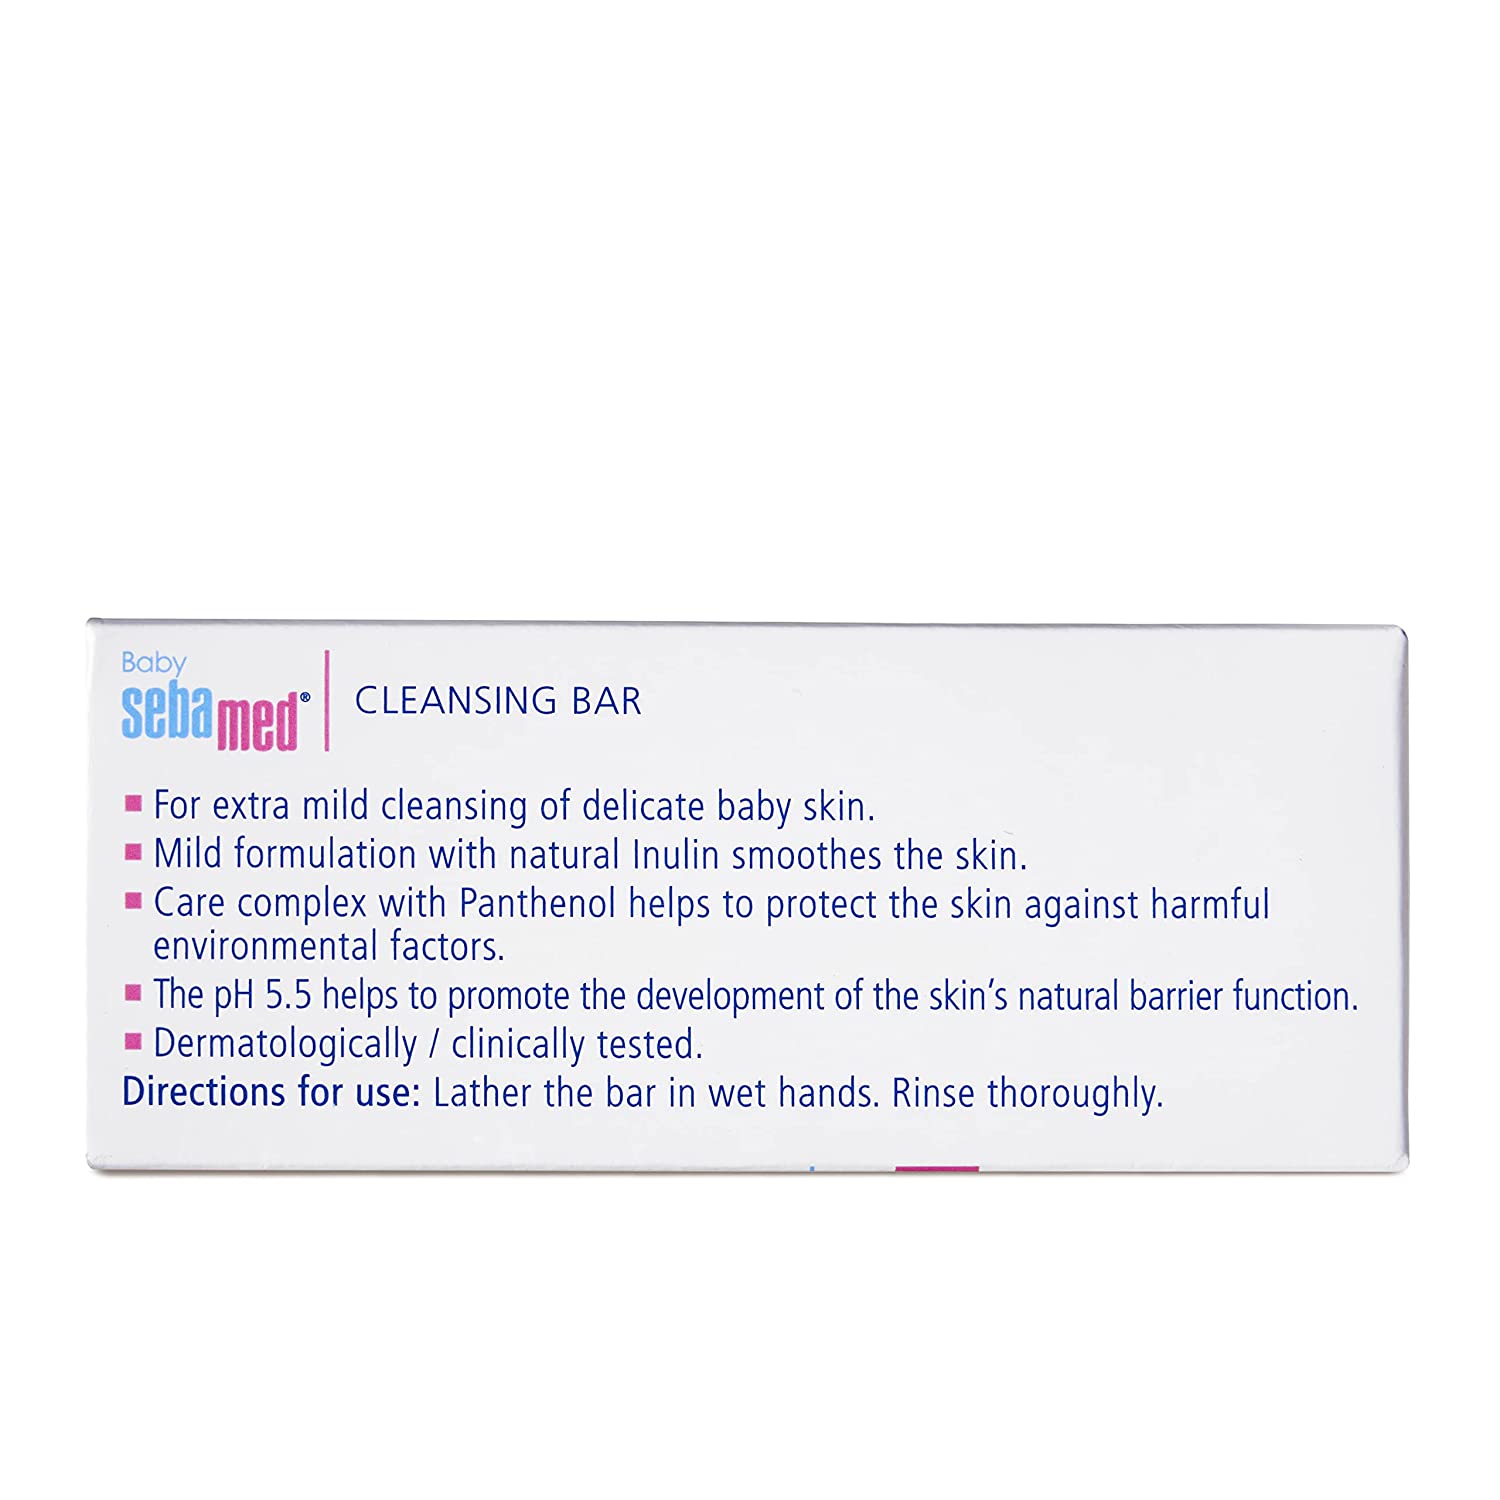 Sebamed Baby Cleansing Bar 100g|Ph 5.5 | With Panthenol|No tears & Soap Free bar| For Delicate skin